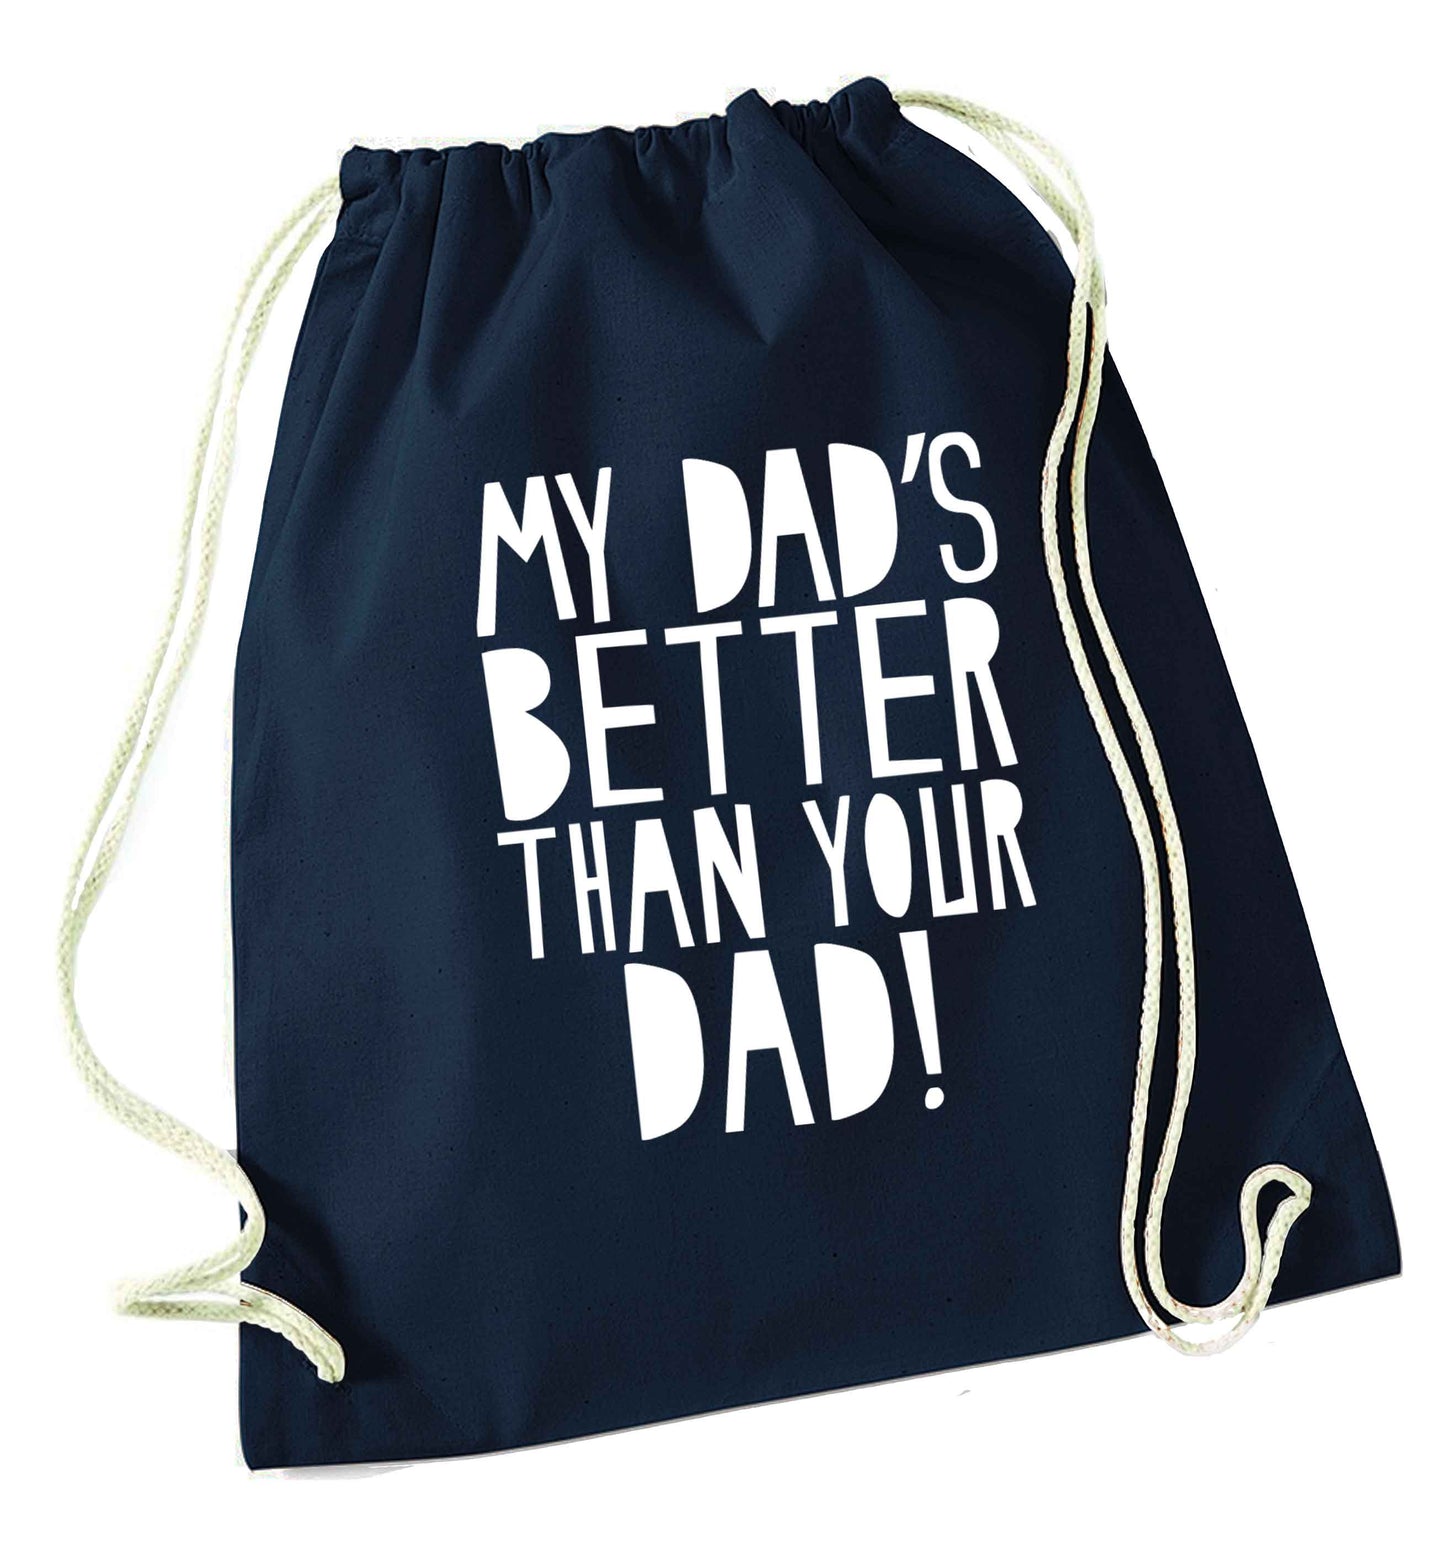 My dad's better than your dad! navy drawstring bag